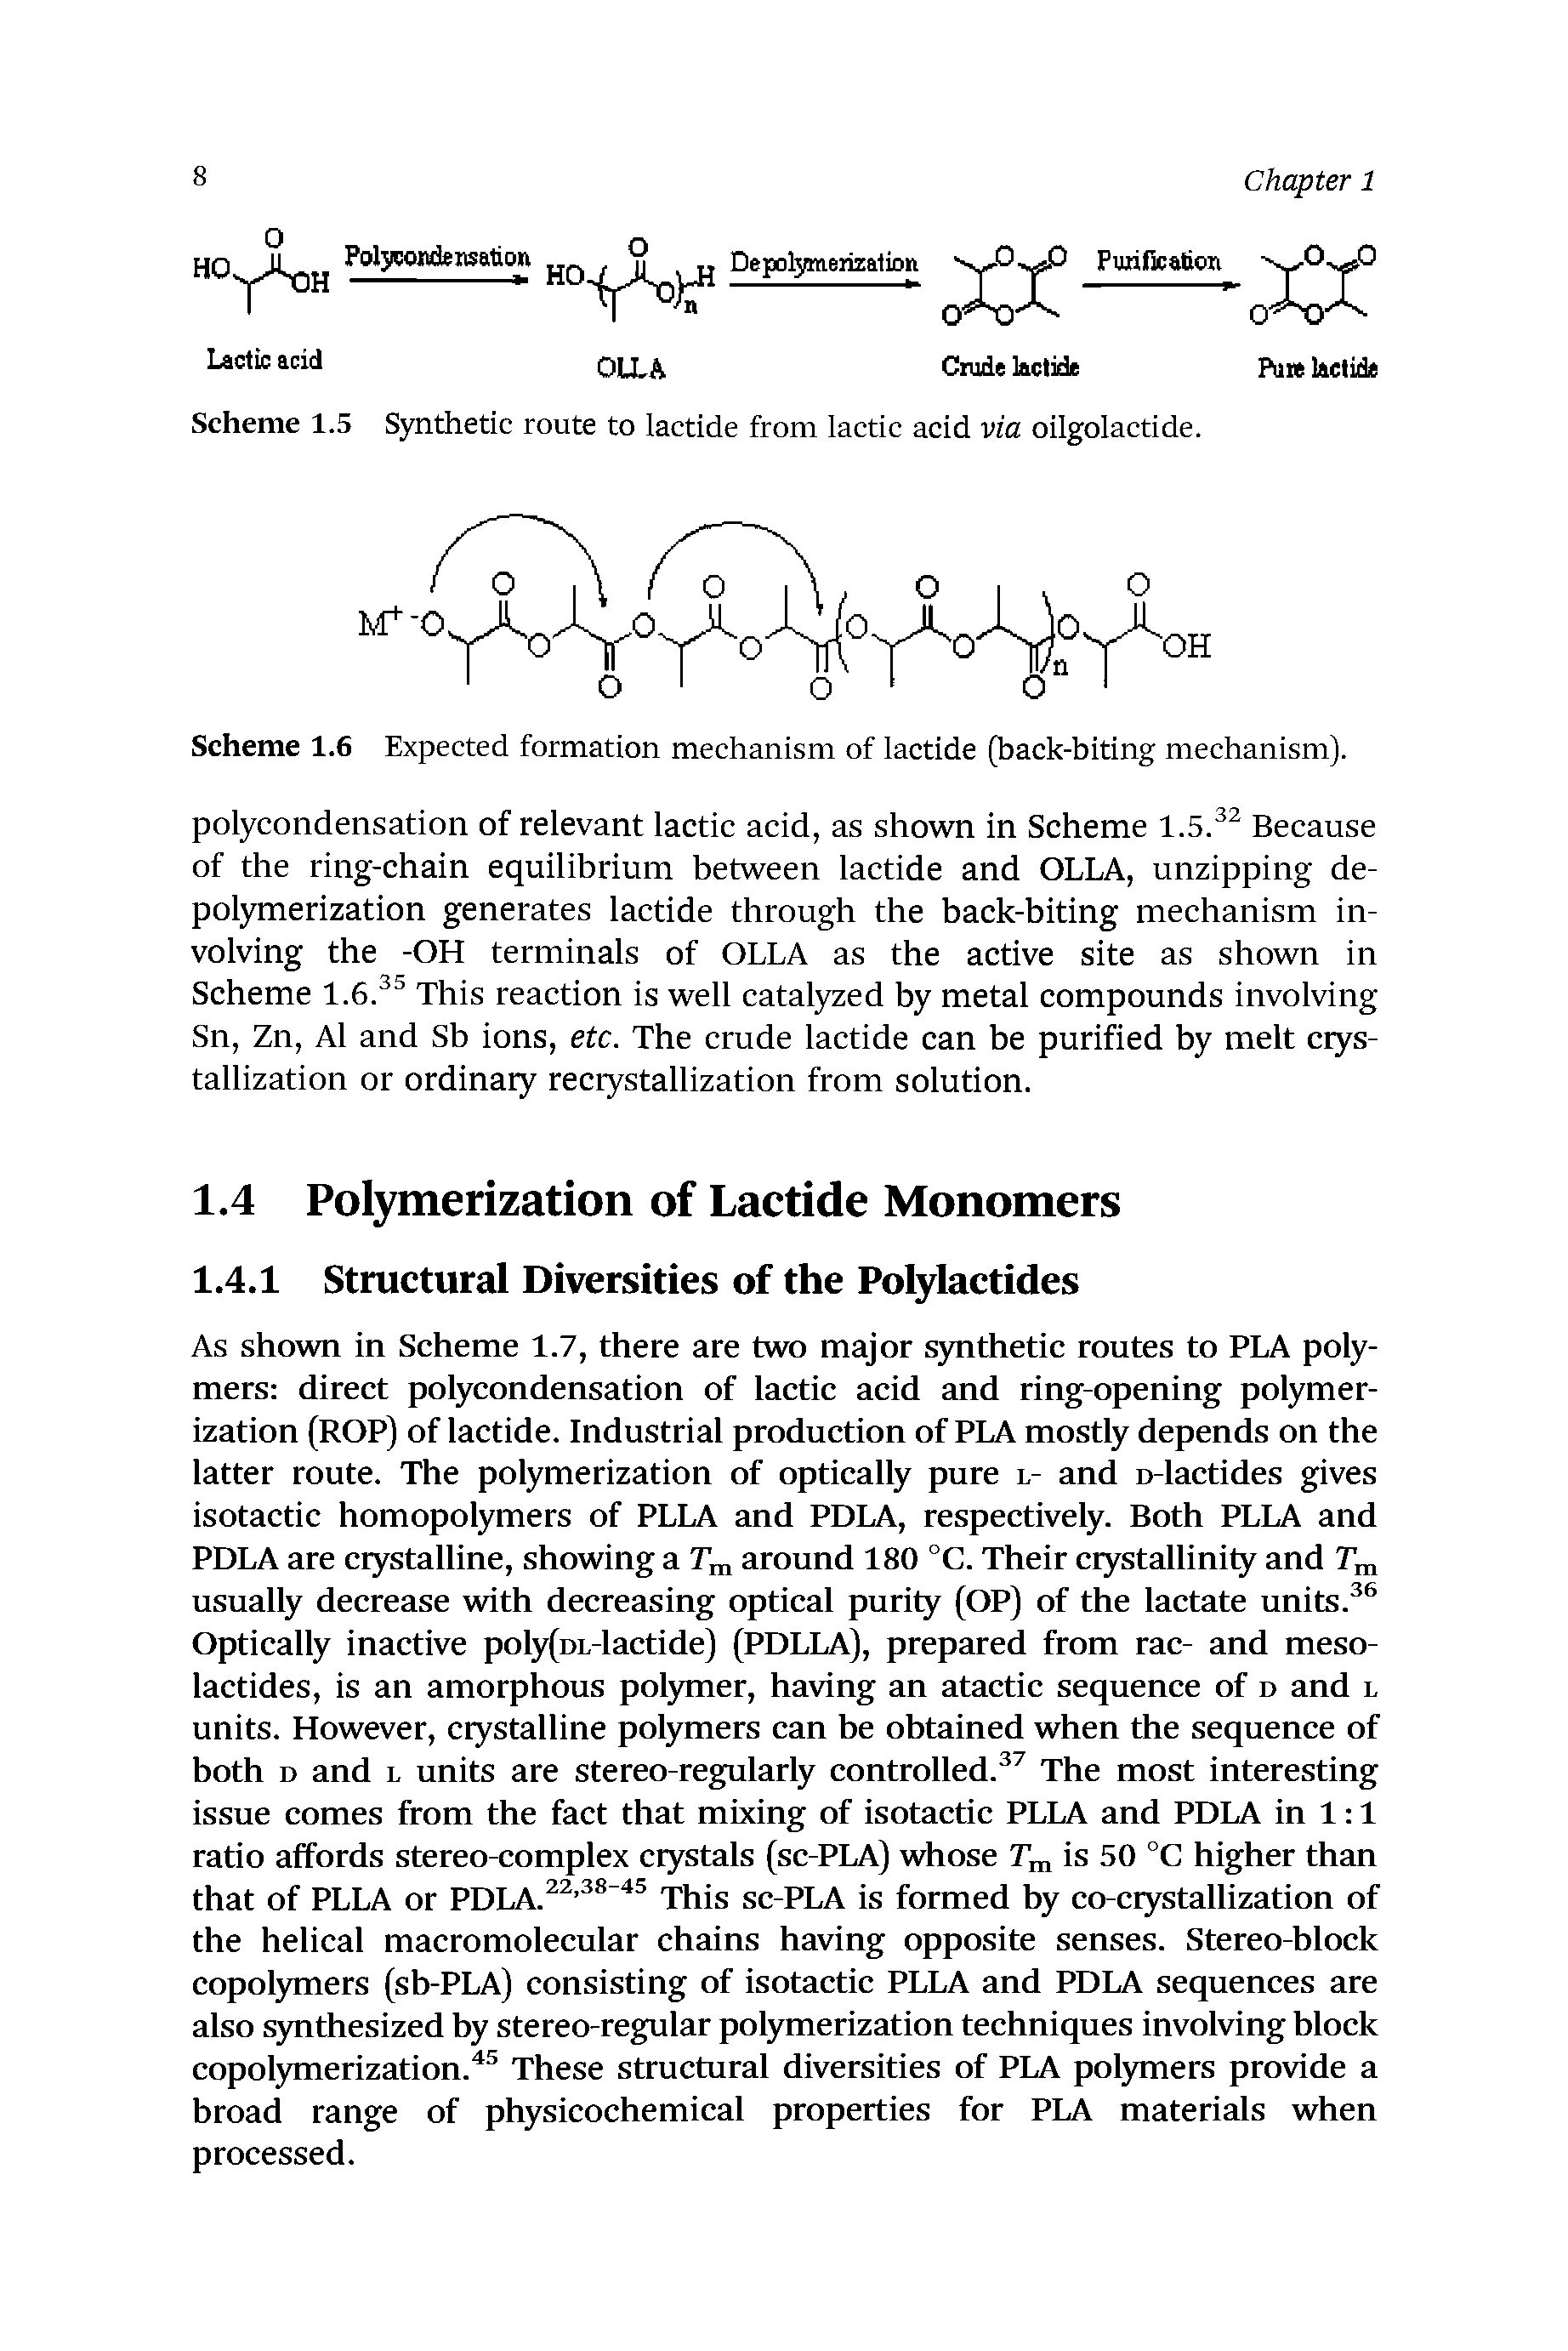 Scheme 1.6 Expected formation mechanism of lactide (back-biting mechanism).